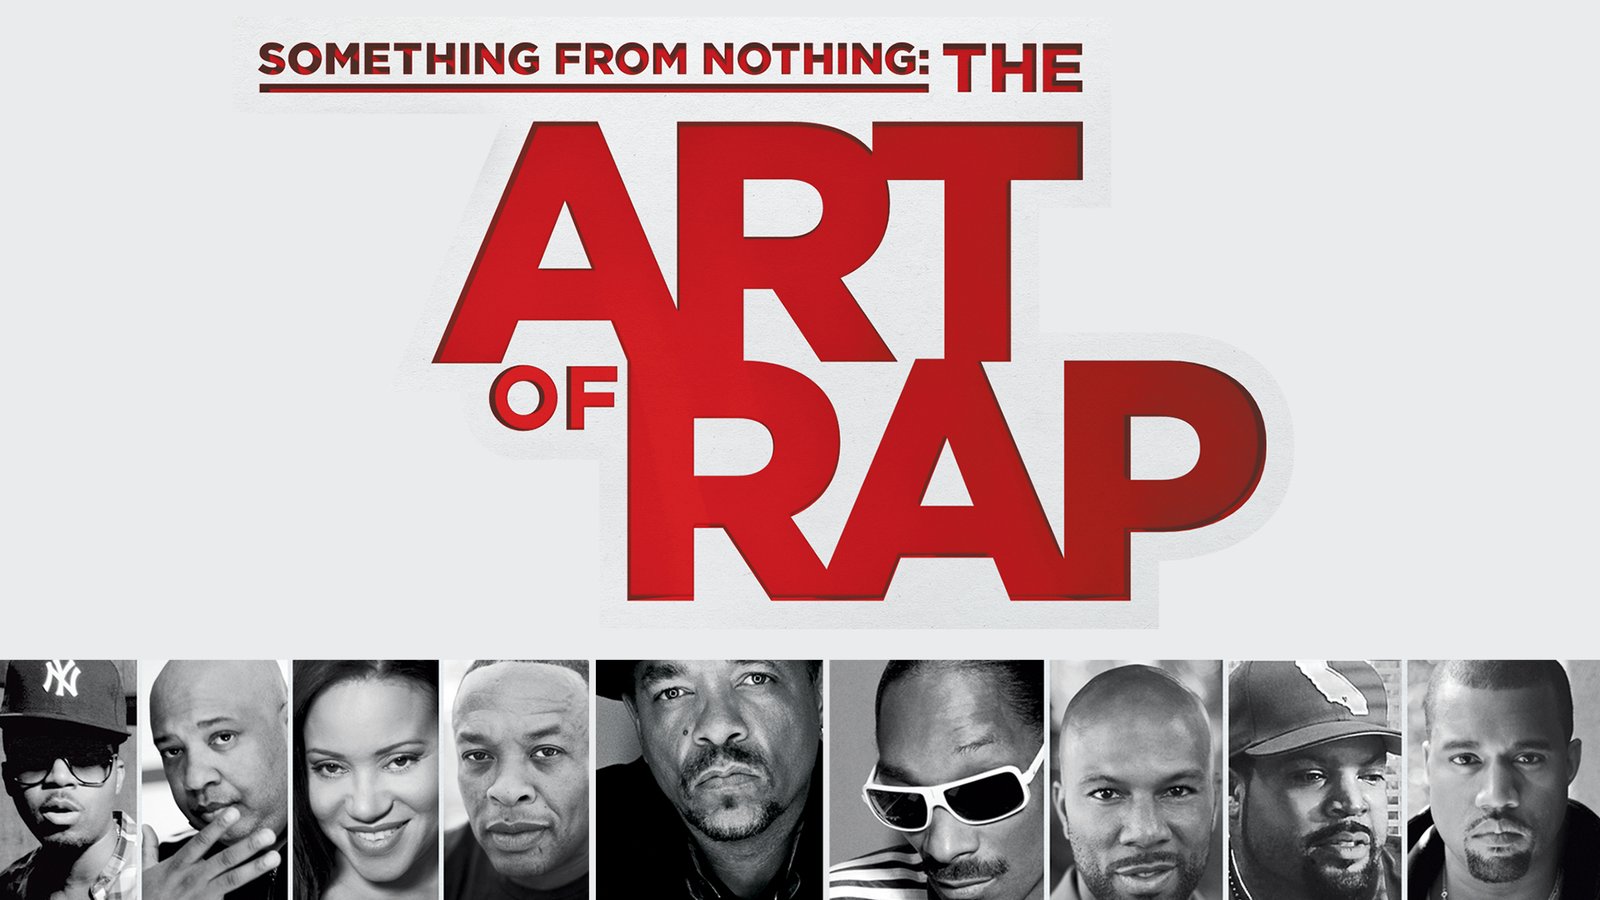 Something from Nothing: The Art of Rap - Tracing the Rise and Global Influence of Hip-Hop